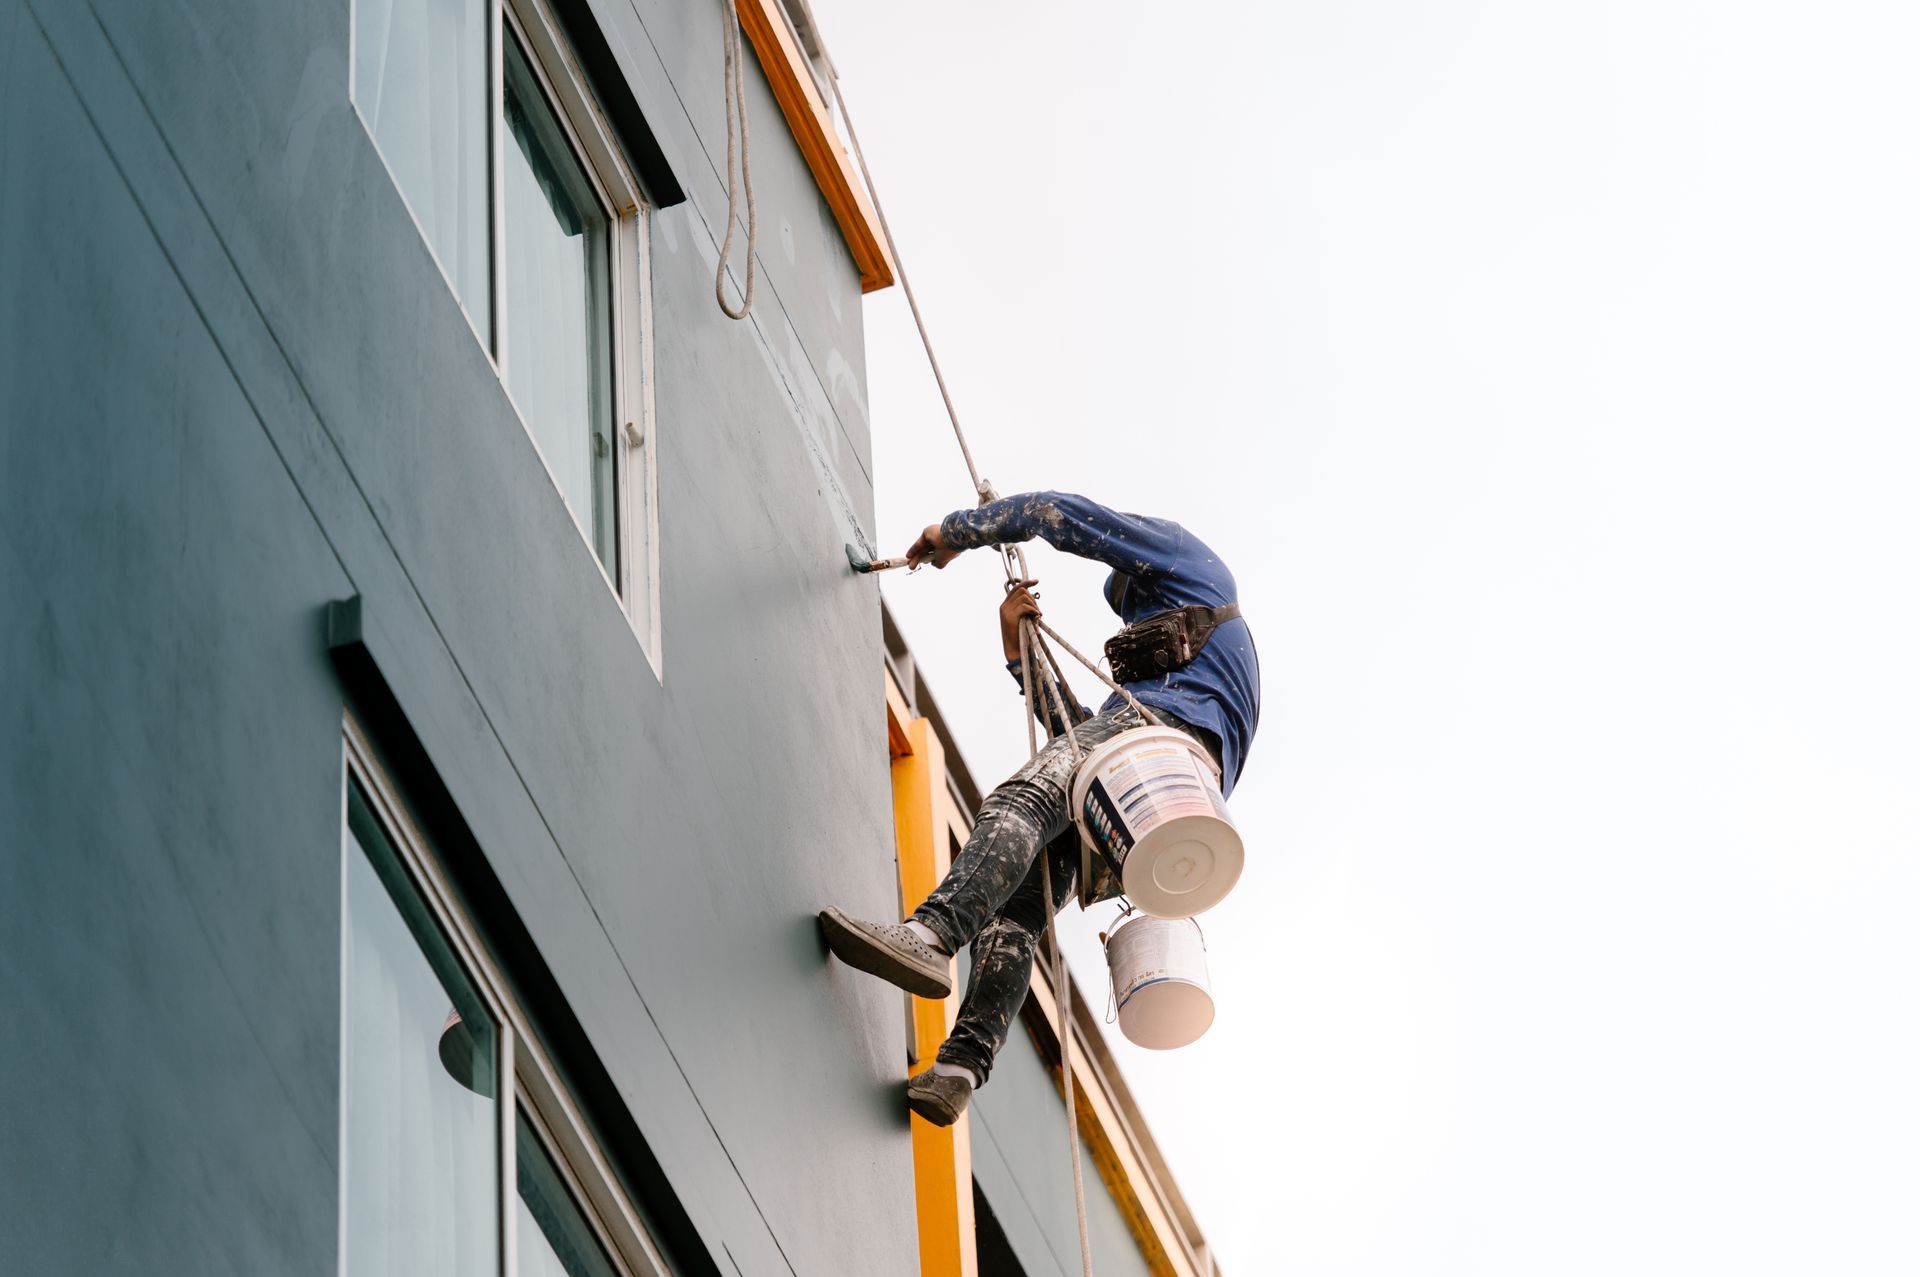 a man is painting the side of a building on a rope .